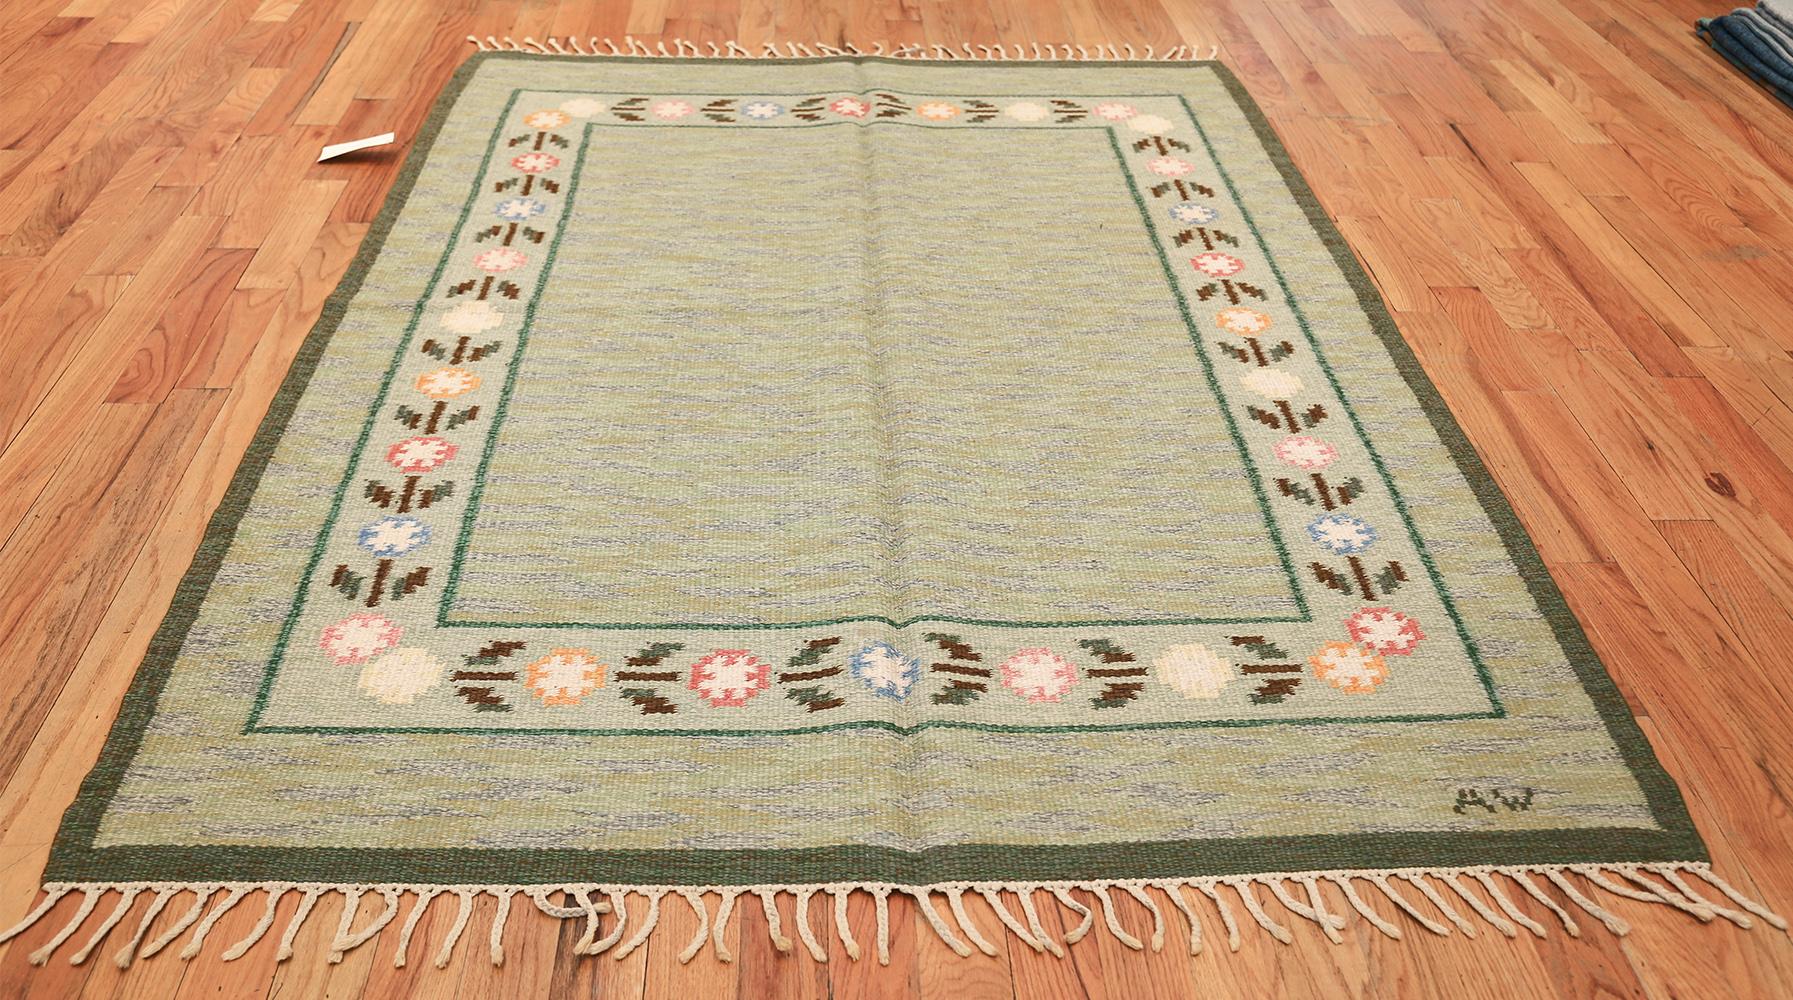 Vintage Swedish rug, origin: Swedish. Size: 5 ft. 5 in x 8 ft. (1.65 m x 2.44 m)

This vintage signed Kilim showcases a wonderful and understated collection of floral motifs and flat-weave figures that embody the soft, sophisticated style of